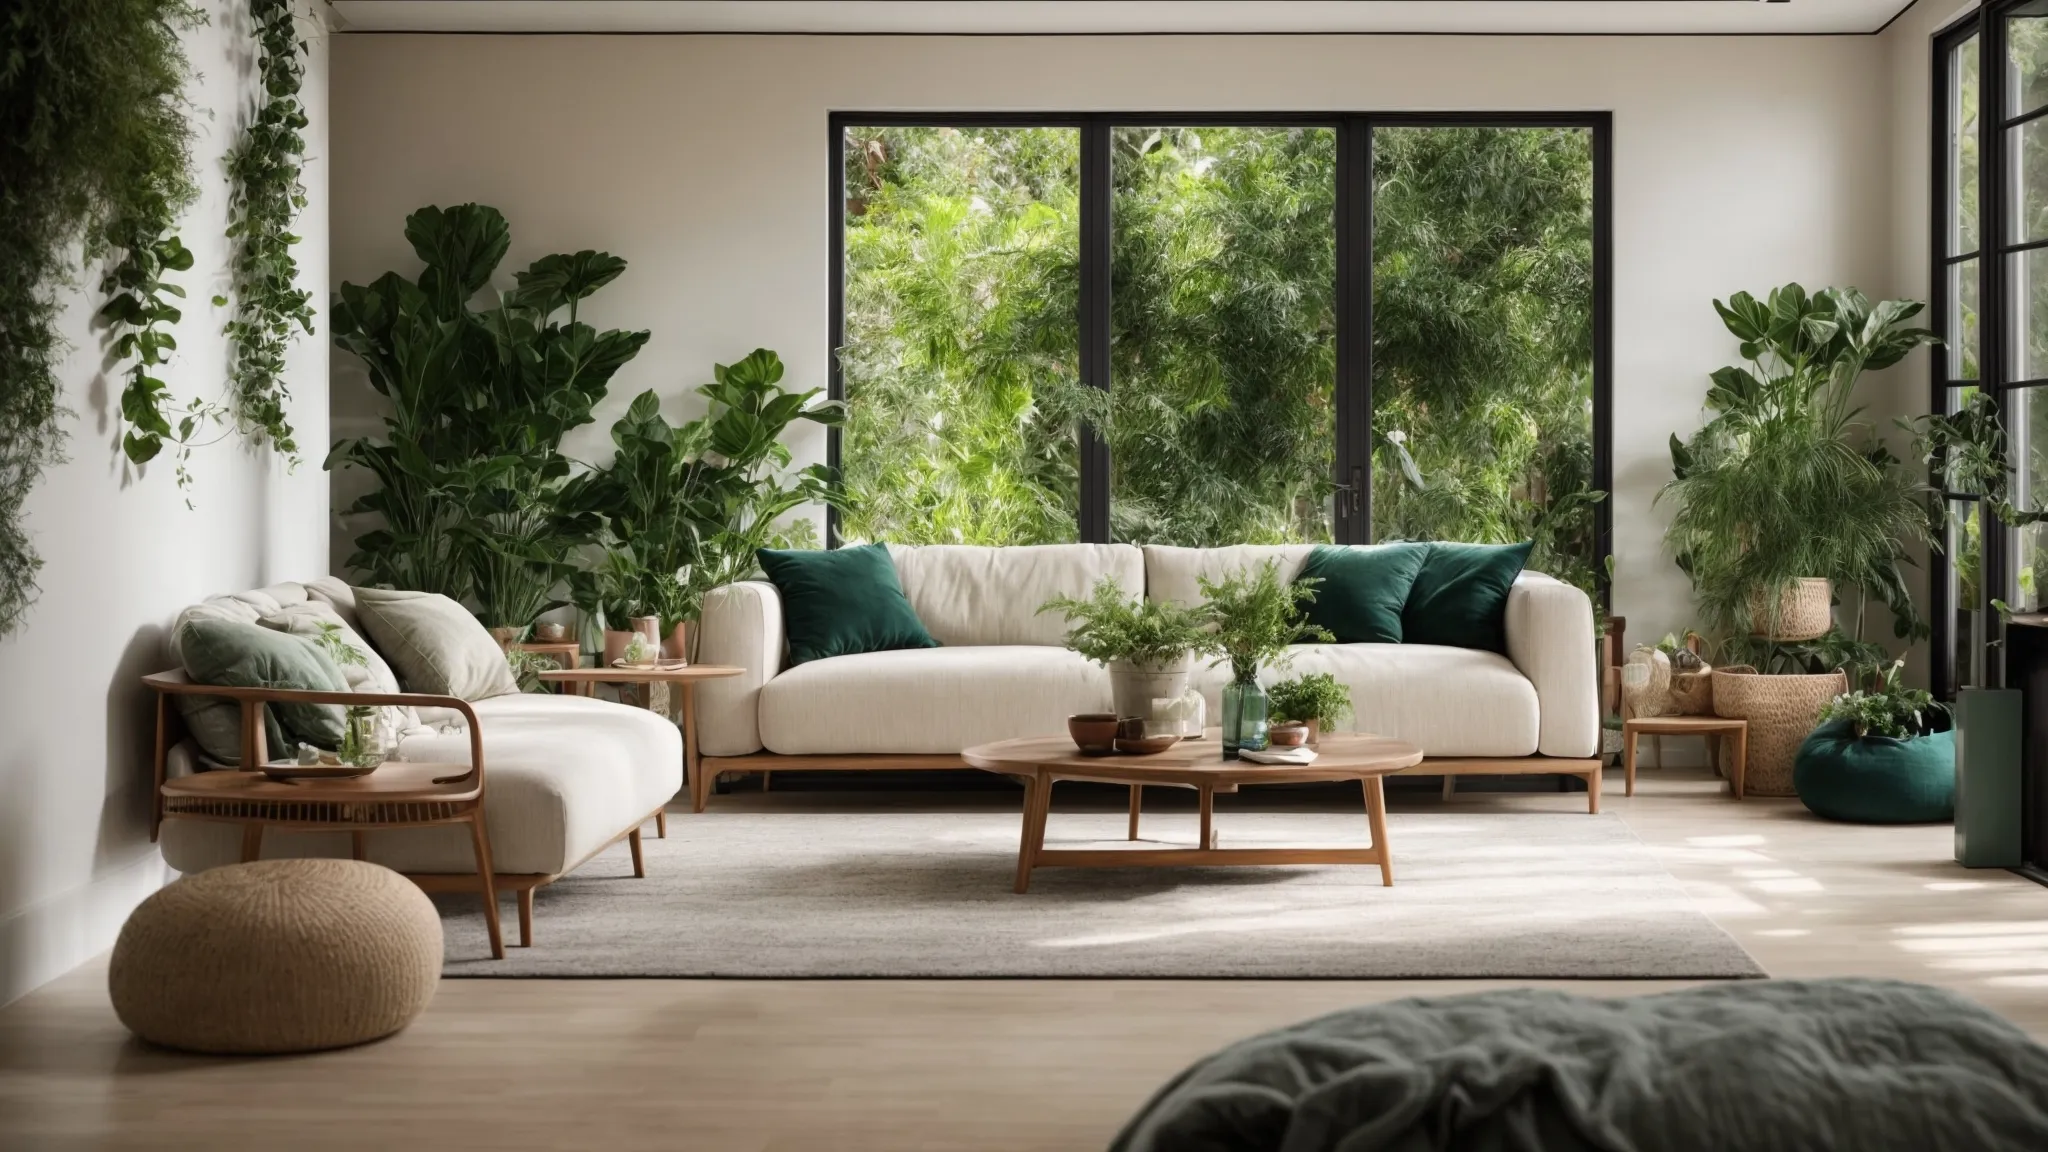 a modern living room decor with bright natural lighting, tastefully arranged furniture, and a prominent display of green plants, ready to be shared on social media.